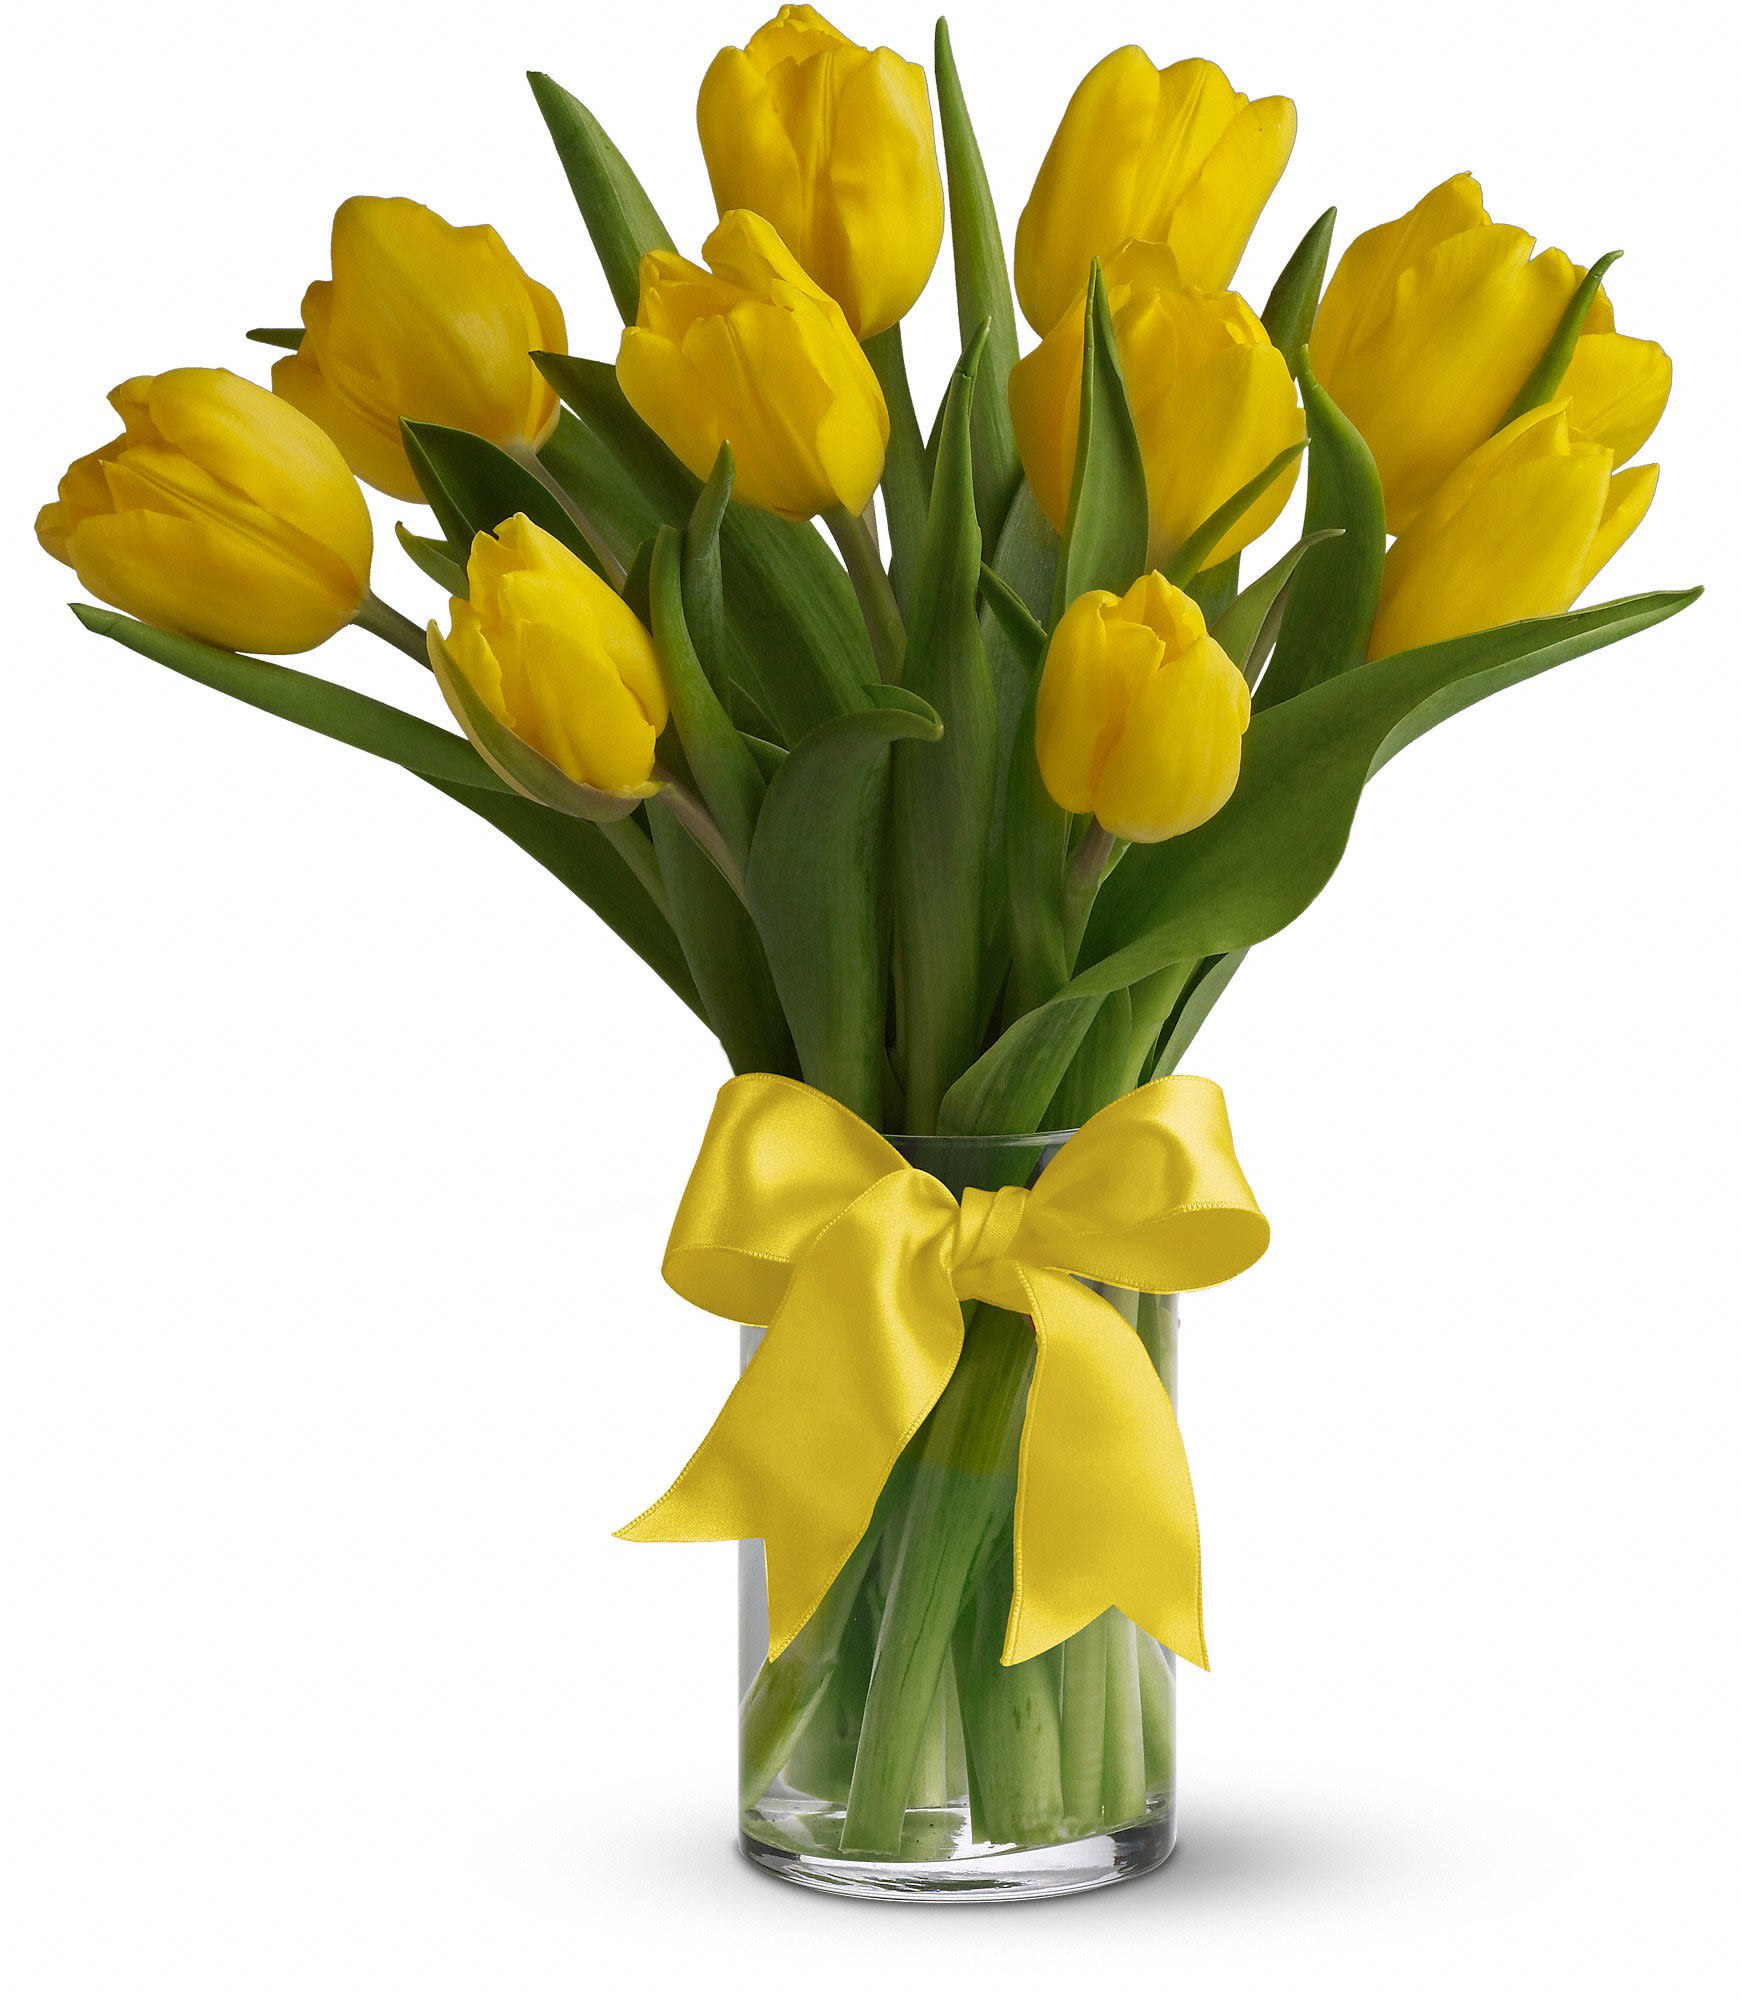 Sunny Yellow Tulips - Sunny yellow tulips are a sure sign of spring. Even if the weather is not cooperating, you can be sure the person who receives this bright bouquet will feel the warmth of your message.    Dazzling yellow tulips are delivered in an exclusive glass vase that's all wrapped up withâ¦what elseâ¦a bright yellow ribbon. So go ahead and send sunshine. Even (or especially) if it's a cloudy day!    Approximately 12 1/2&quot; W x 14 3/4&quot; H    Orientation: All-Around    As Shown : T140-1A  Deluxe : T140-1B  Premium : T140-1C